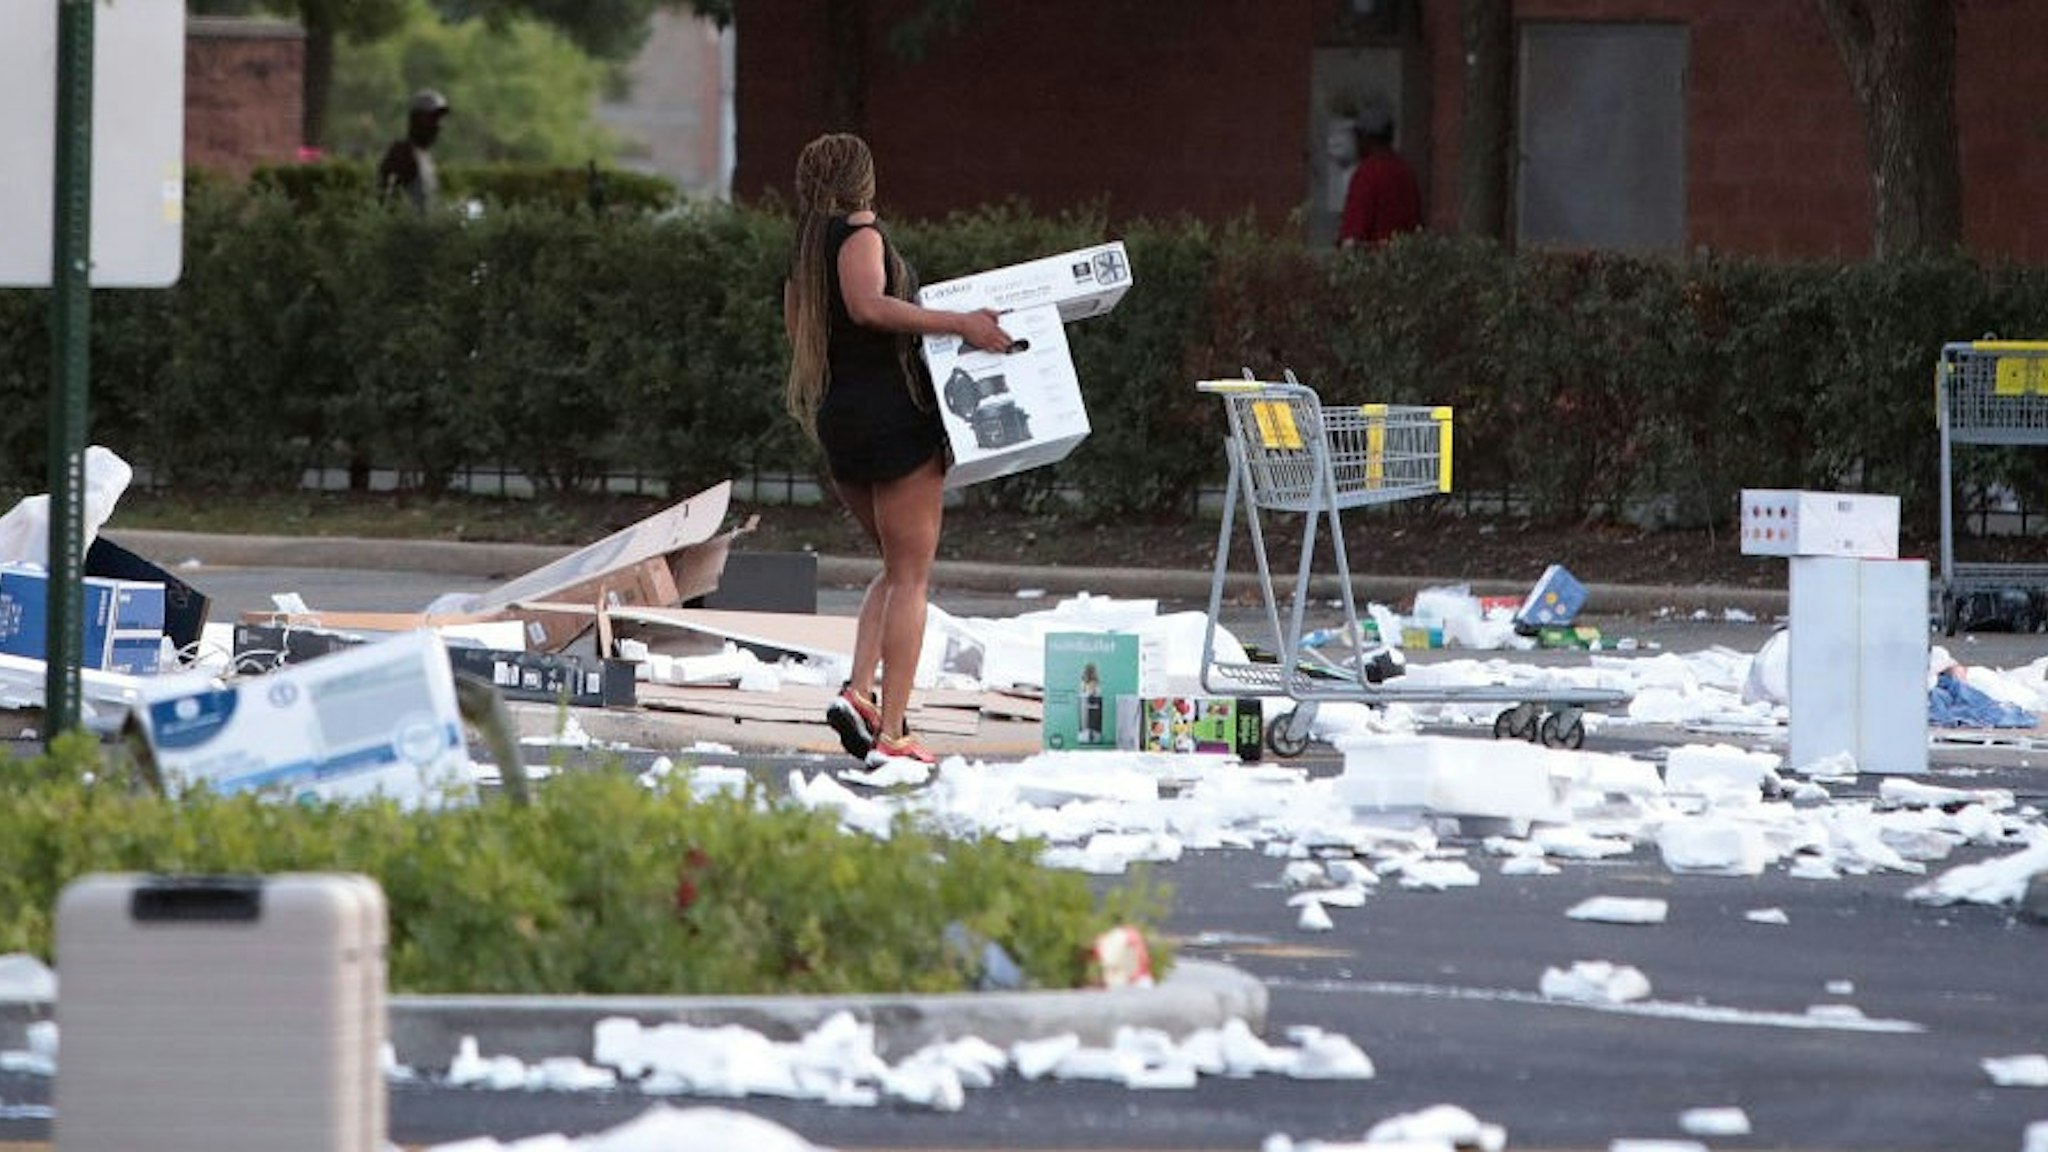 CHICAGO, ILLINOIS - AUGUST 10: A person carries a box near a looted Best Buy store seen after parts of the city had widespread looting and vandalism, on August 10, 2020 in Chicago, Illinois. Police made several arrests during the night of unrest and recovered at least one firearm. (Photo by